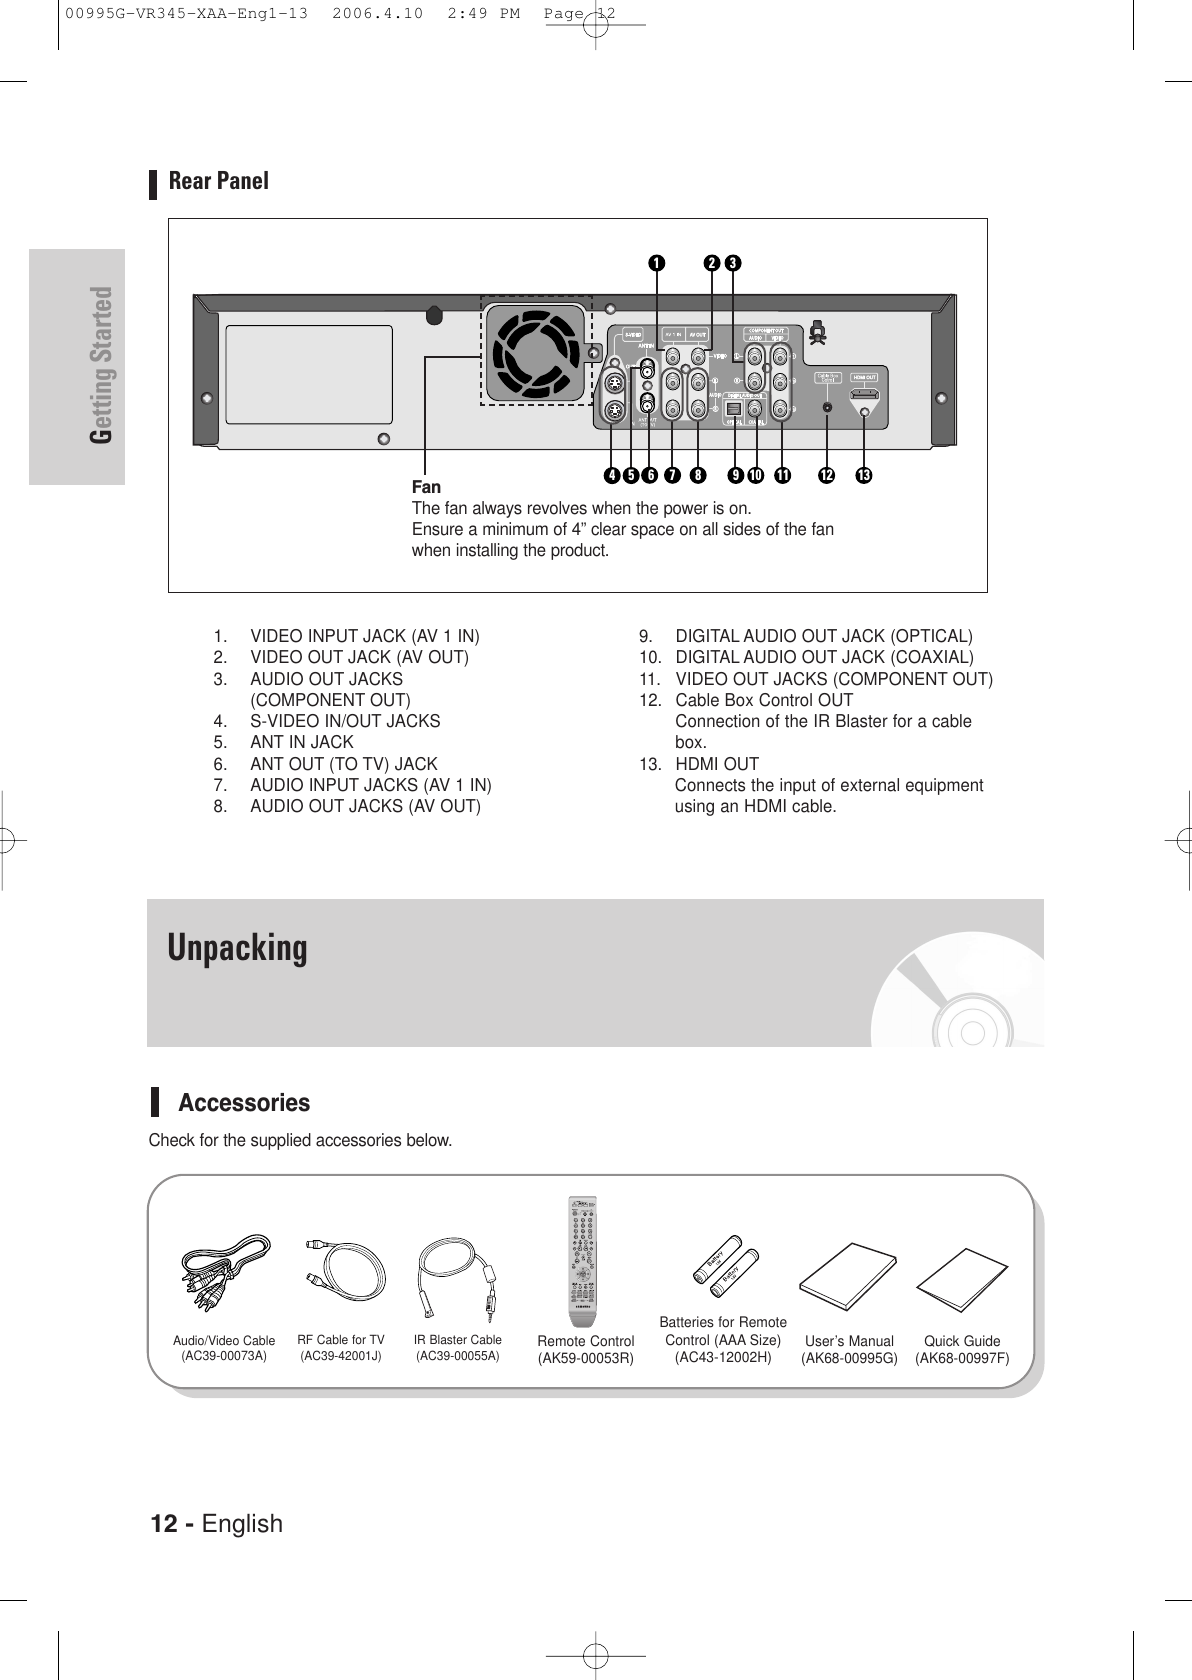 12 - EnglishGetting StartedRear Panel 1. VIDEO INPUT JACK (AV 1 IN)2. VIDEO OUT JACK (AV OUT)3. AUDIO OUT JACKS(COMPONENT OUT) 4. S-VIDEO IN/OUT JACKS5. ANT IN JACK6. ANT OUT (TO TV) JACK    7. AUDIO INPUT JACKS (AV 1 IN)8. AUDIO OUT JACKS (AV OUT)9. DIGITAL AUDIO OUT JACK (OPTICAL) 10. DIGITAL AUDIO OUT JACK (COAXIAL)11. VIDEO OUT JACKS (COMPONENT OUT)12. Cable Box Control OUTConnection of the IR Blaster for a cablebox.13. HDMI OUTConnects the input of external equipmentusing an HDMI cable.10 11 131242 36 7 8591FanThe fan always revolves when the power is on. Ensure a minimum of 4” clear space on all sides of the fanwhen installing the product.UnpackingAccessoriesCheck for the supplied accessories below.Batteries for RemoteControl (AAA Size)(AC43-12002H)Remote Control(AK59-00053R) User’s Manual (AK68-00995G)Audio/Video Cable (AC39-00073A)RF Cable for TV (AC39-42001J) IR Blaster Cable(AC39-00055A)Quick Guide(AK68-00997F)00995G-VR345-XAA-Eng1-13  2006.4.10  2:49 PM  Page 12